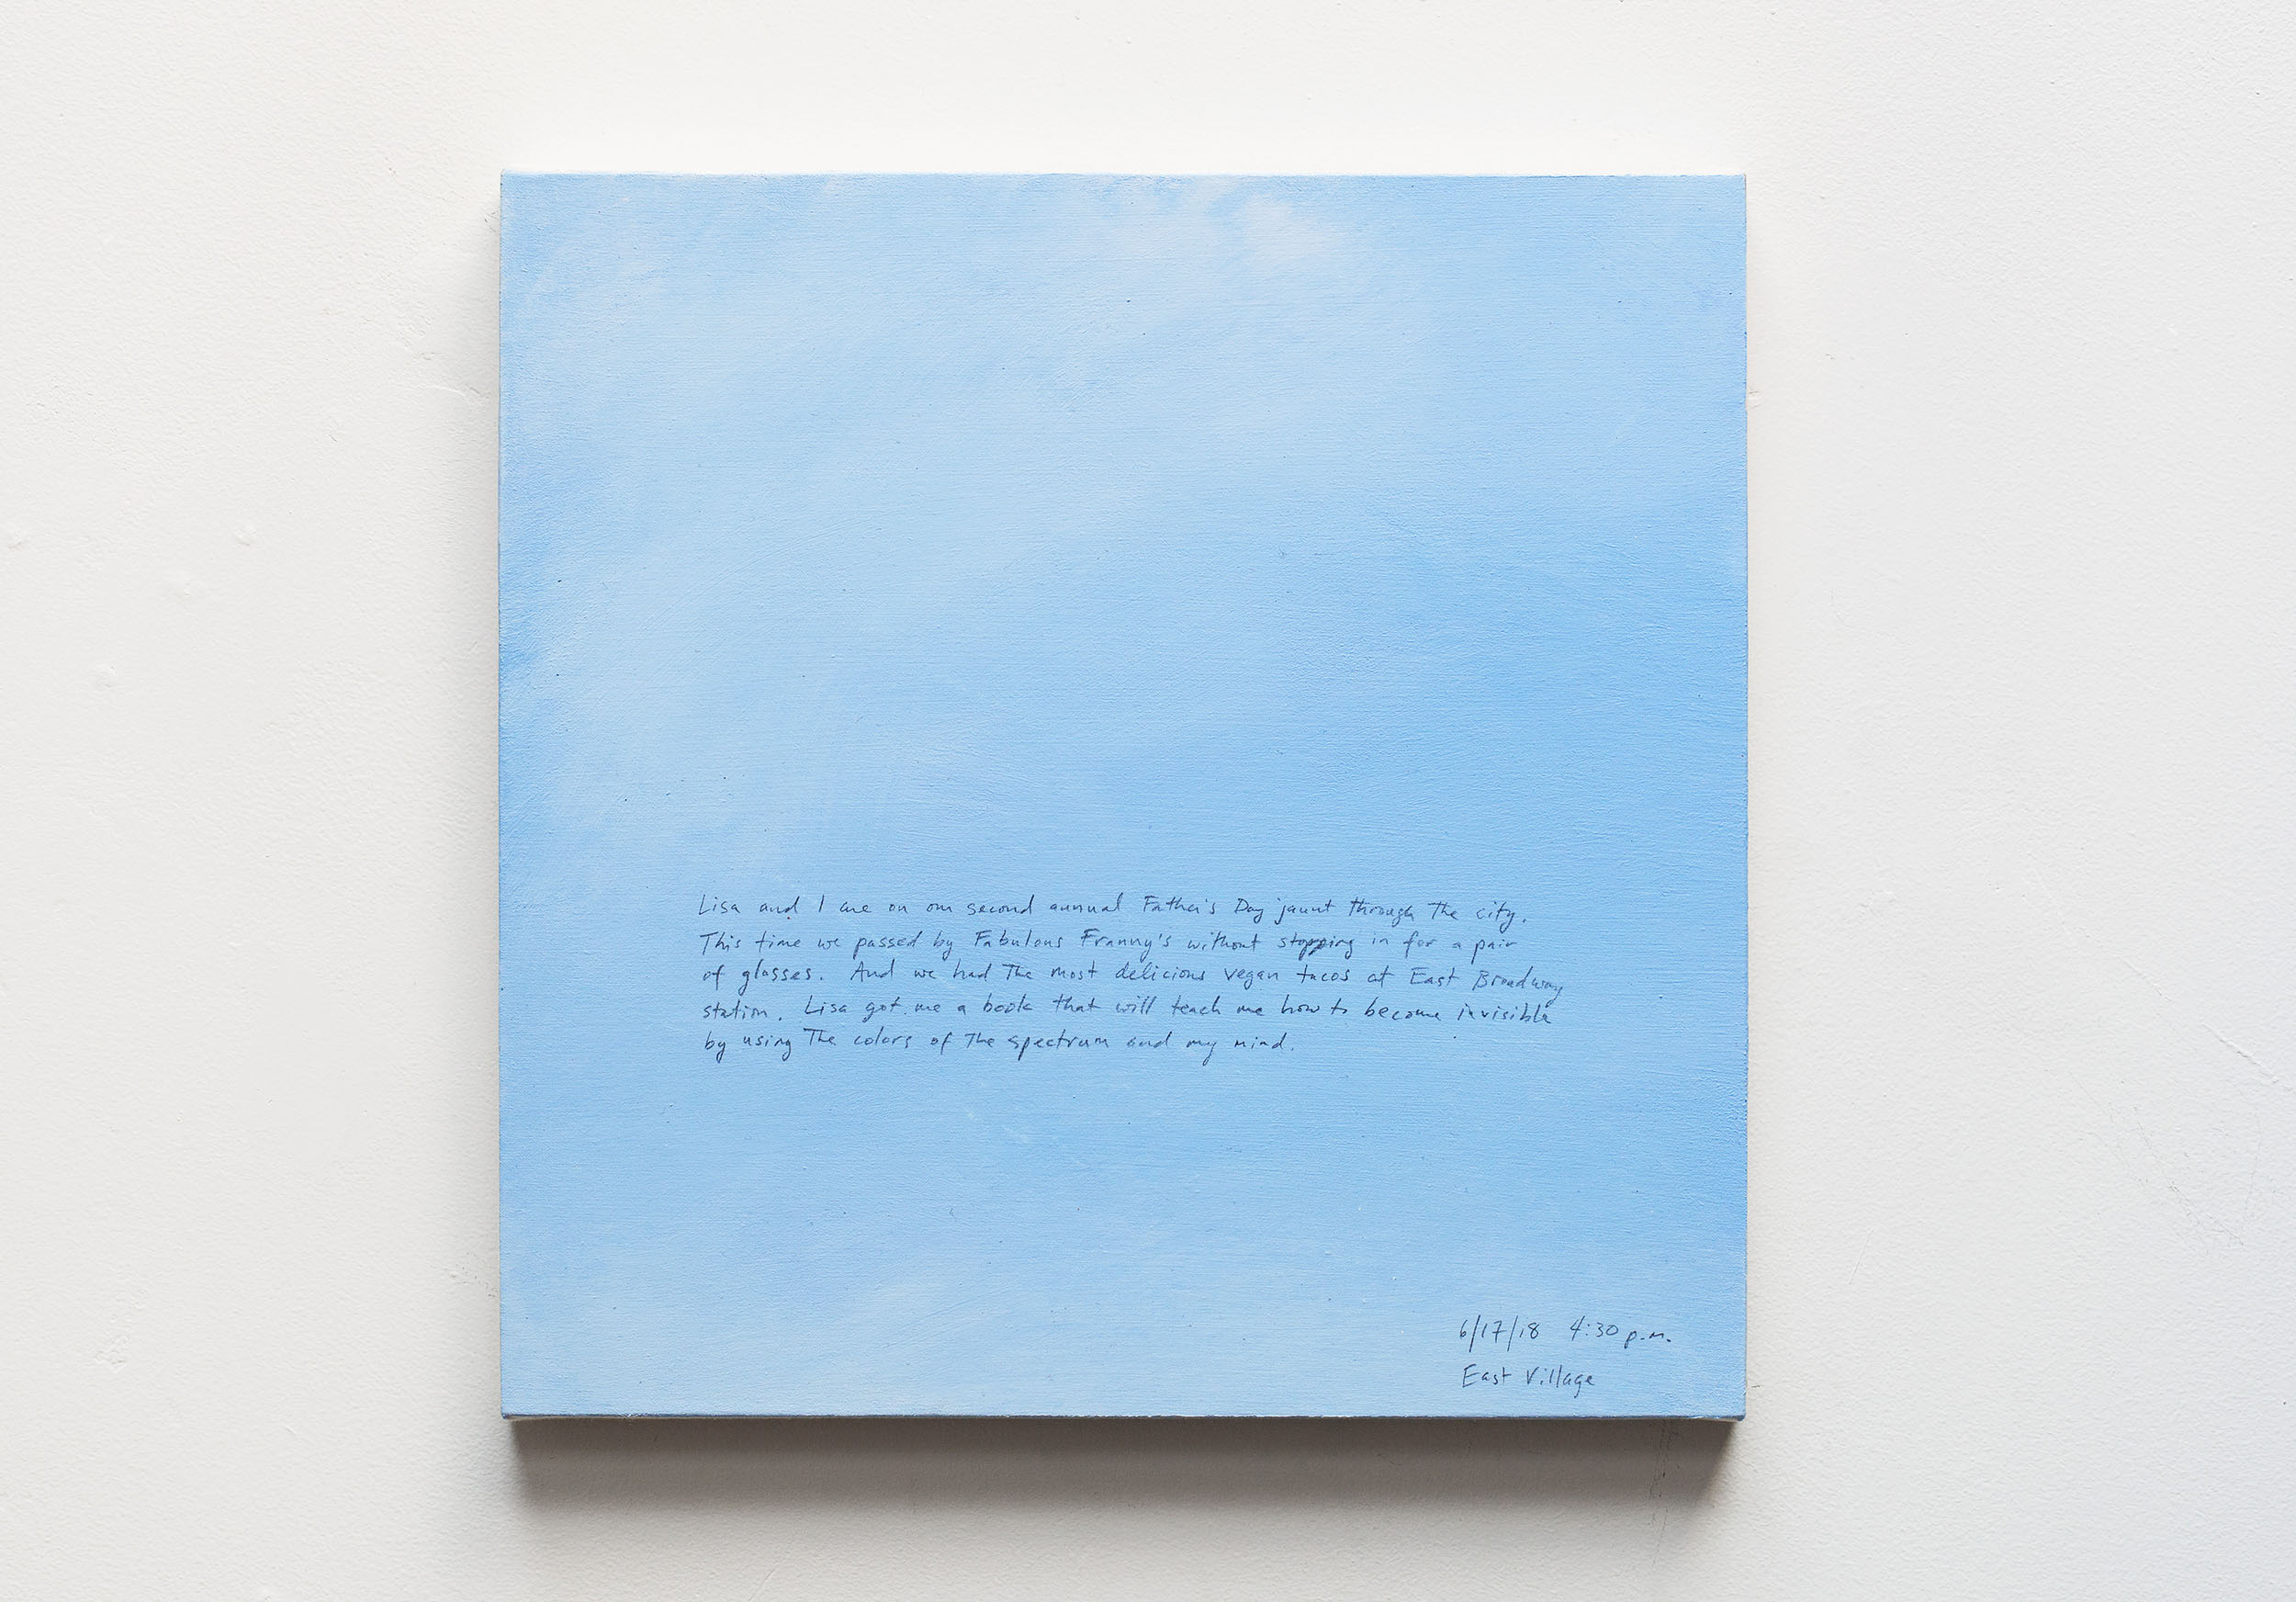 A 14 × 14 inch, acrylic painting of the sky. A journal entry is handwritten on the painting: